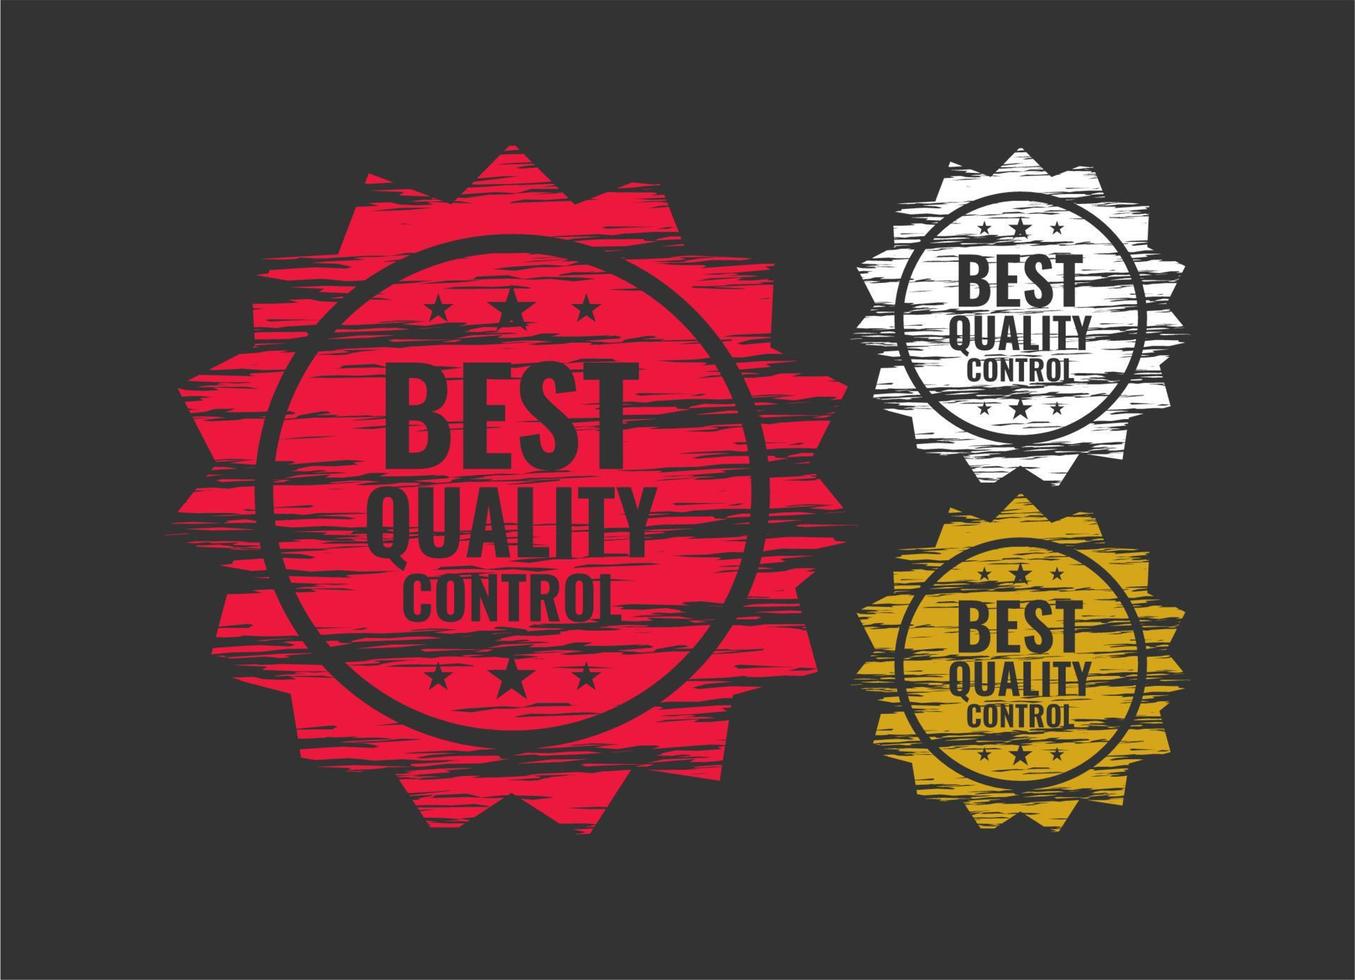 vector graphic element guarantee of best quality control for rated product